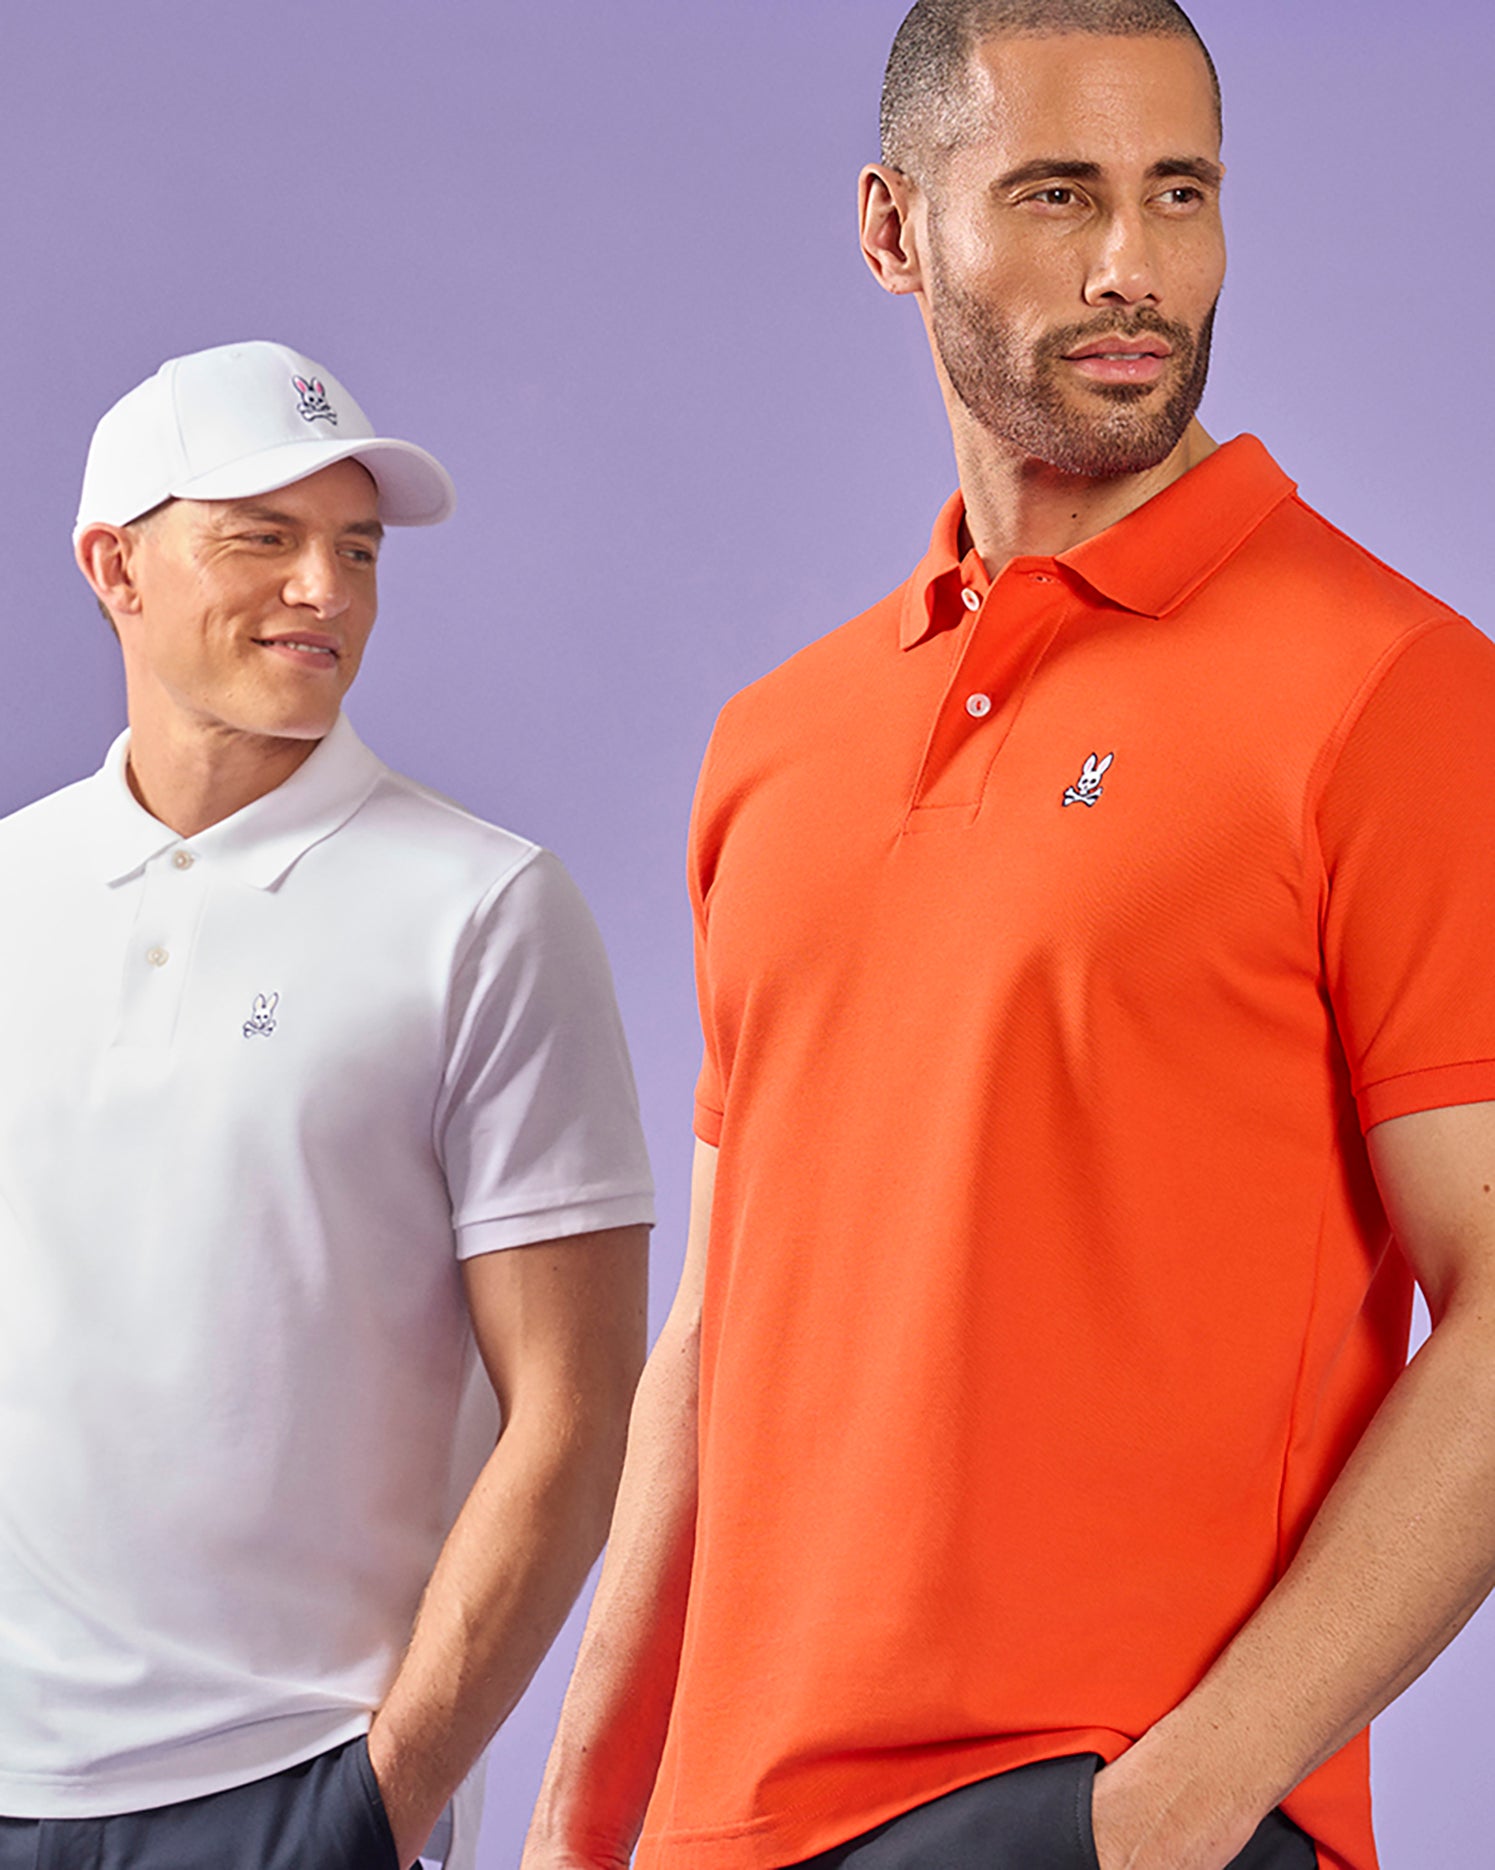 Two men modeling Psycho Bunny classic piqué polo shirts, one in white and the other in orange, against a dual-tone purple background. Both shirts feature a small Psycho Bunny logo on the chest.